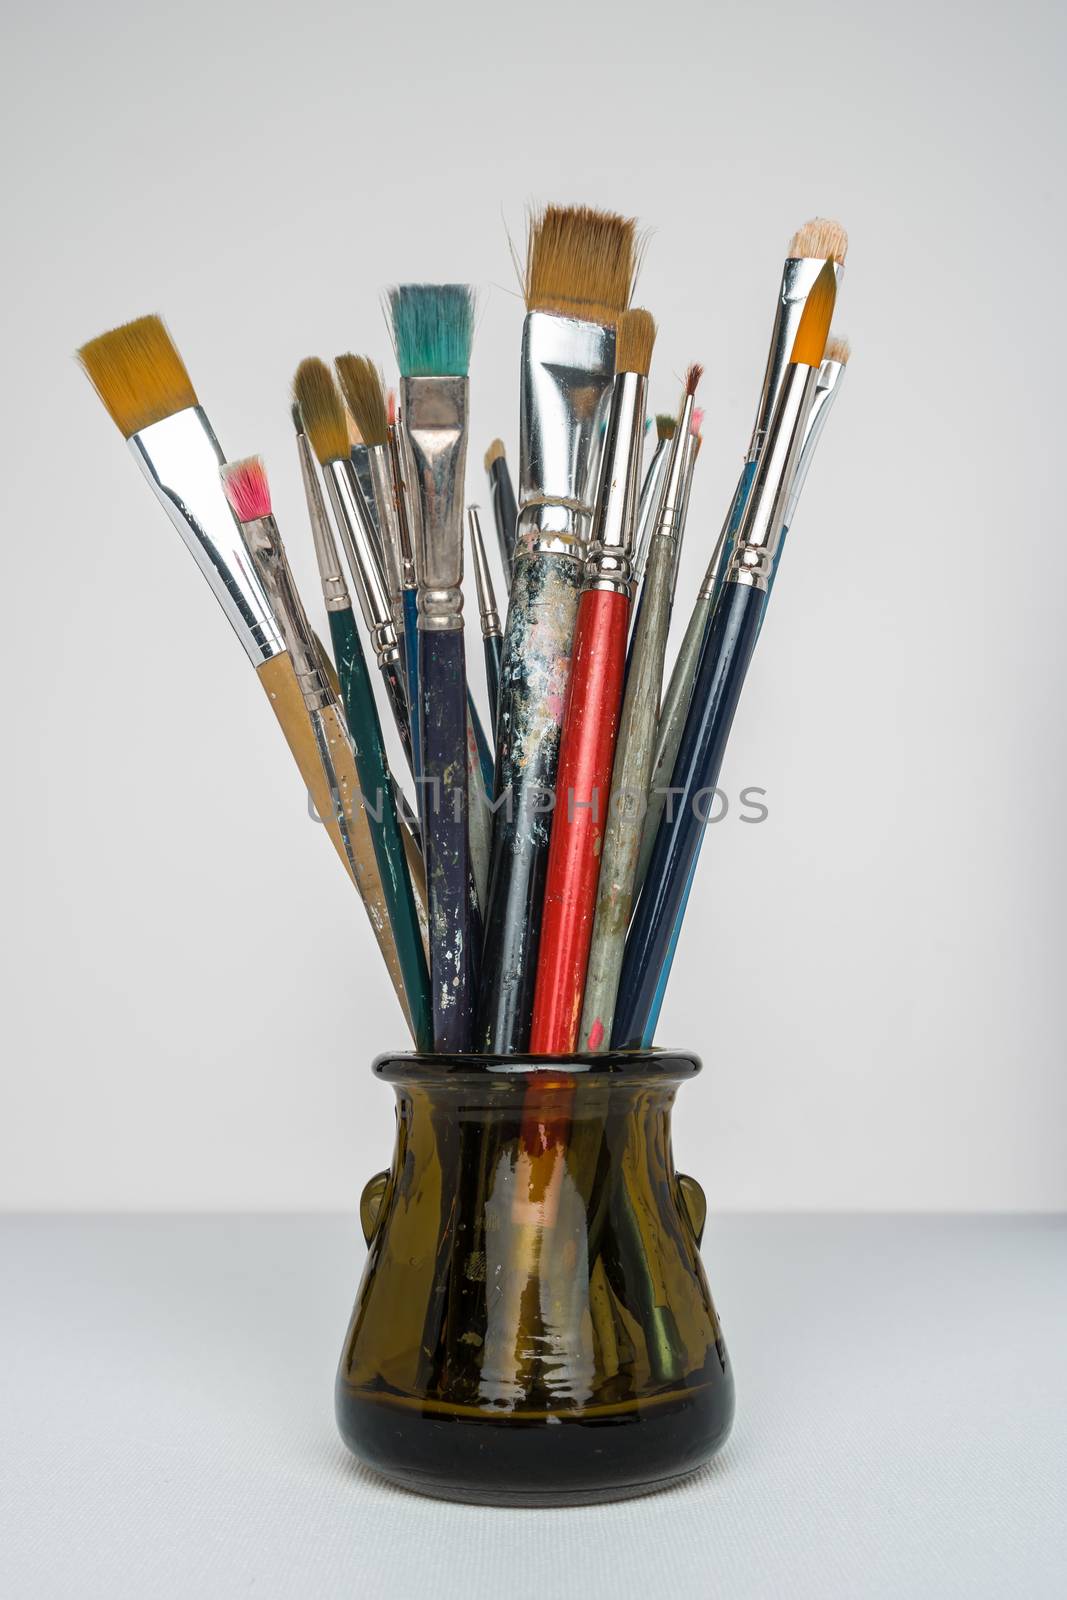 Photo of artist paint brushes in a jar by AnaMarques